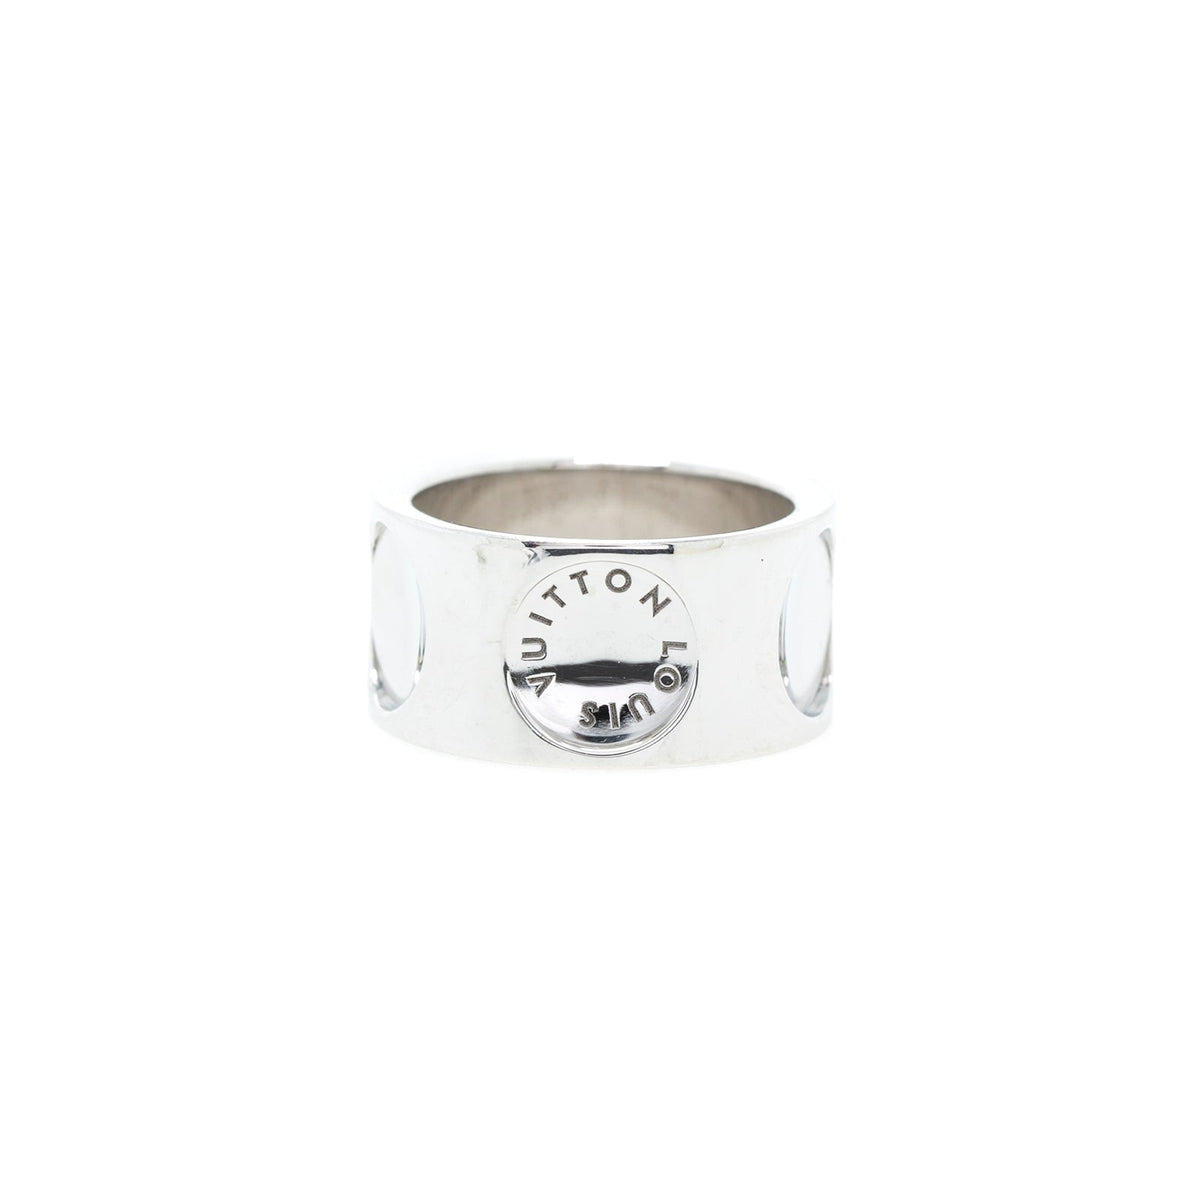 Empreinte Ring, White Gold and Diamonds - Jewelry - Categories